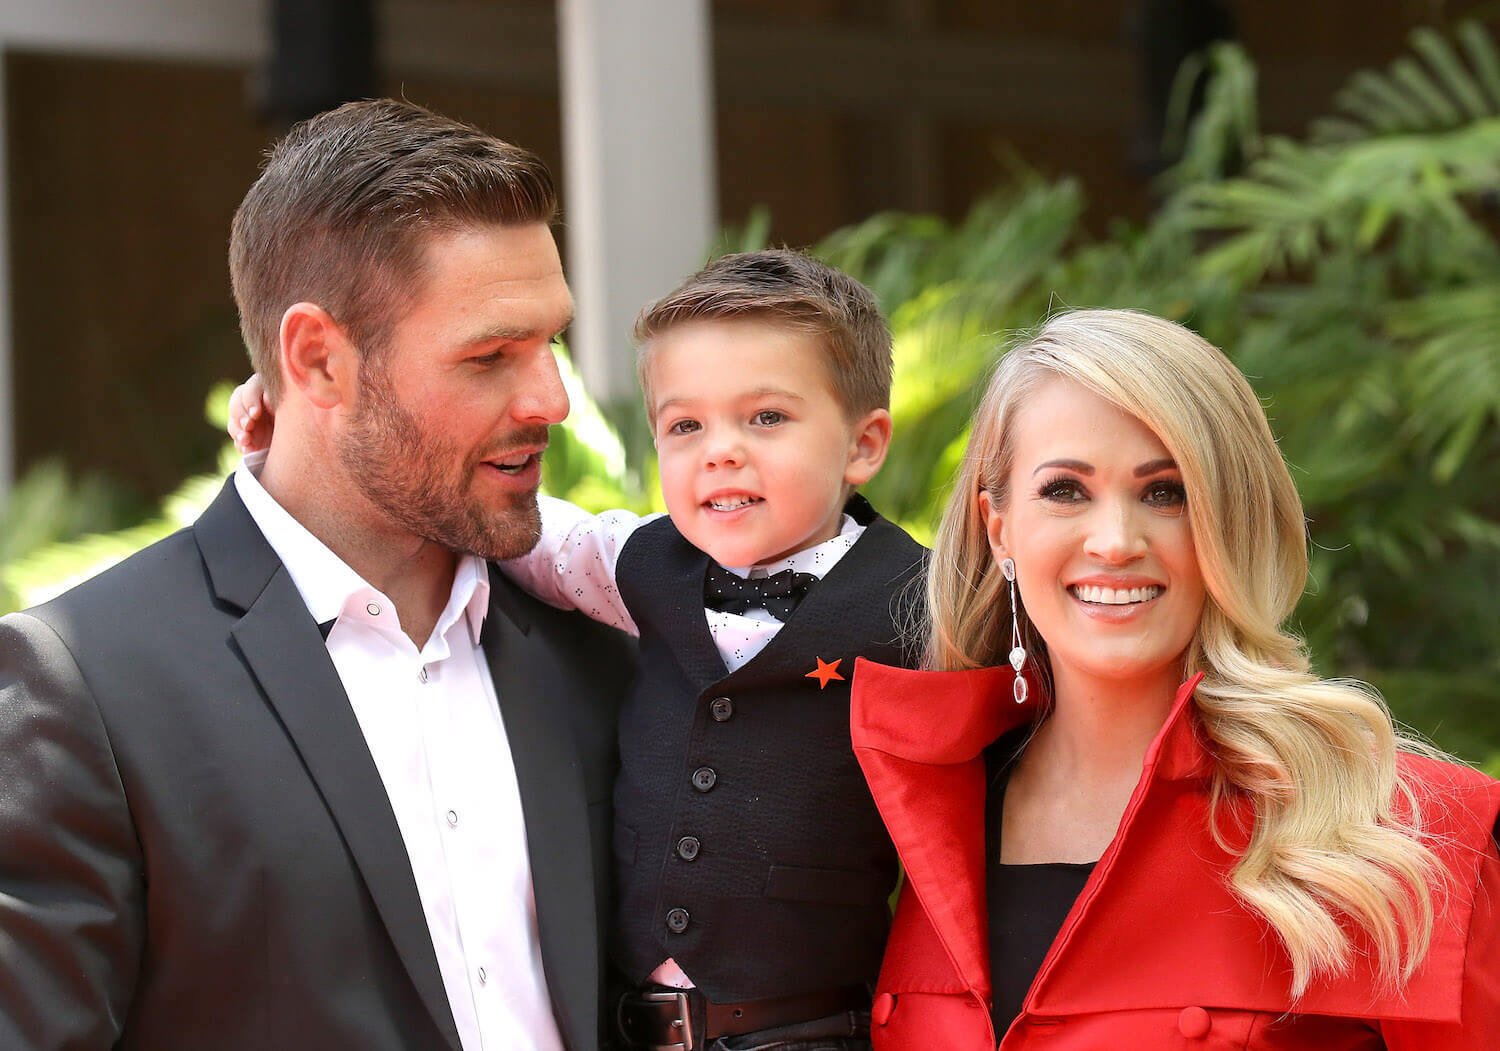 Carrie Underwood smiling with her husband and son